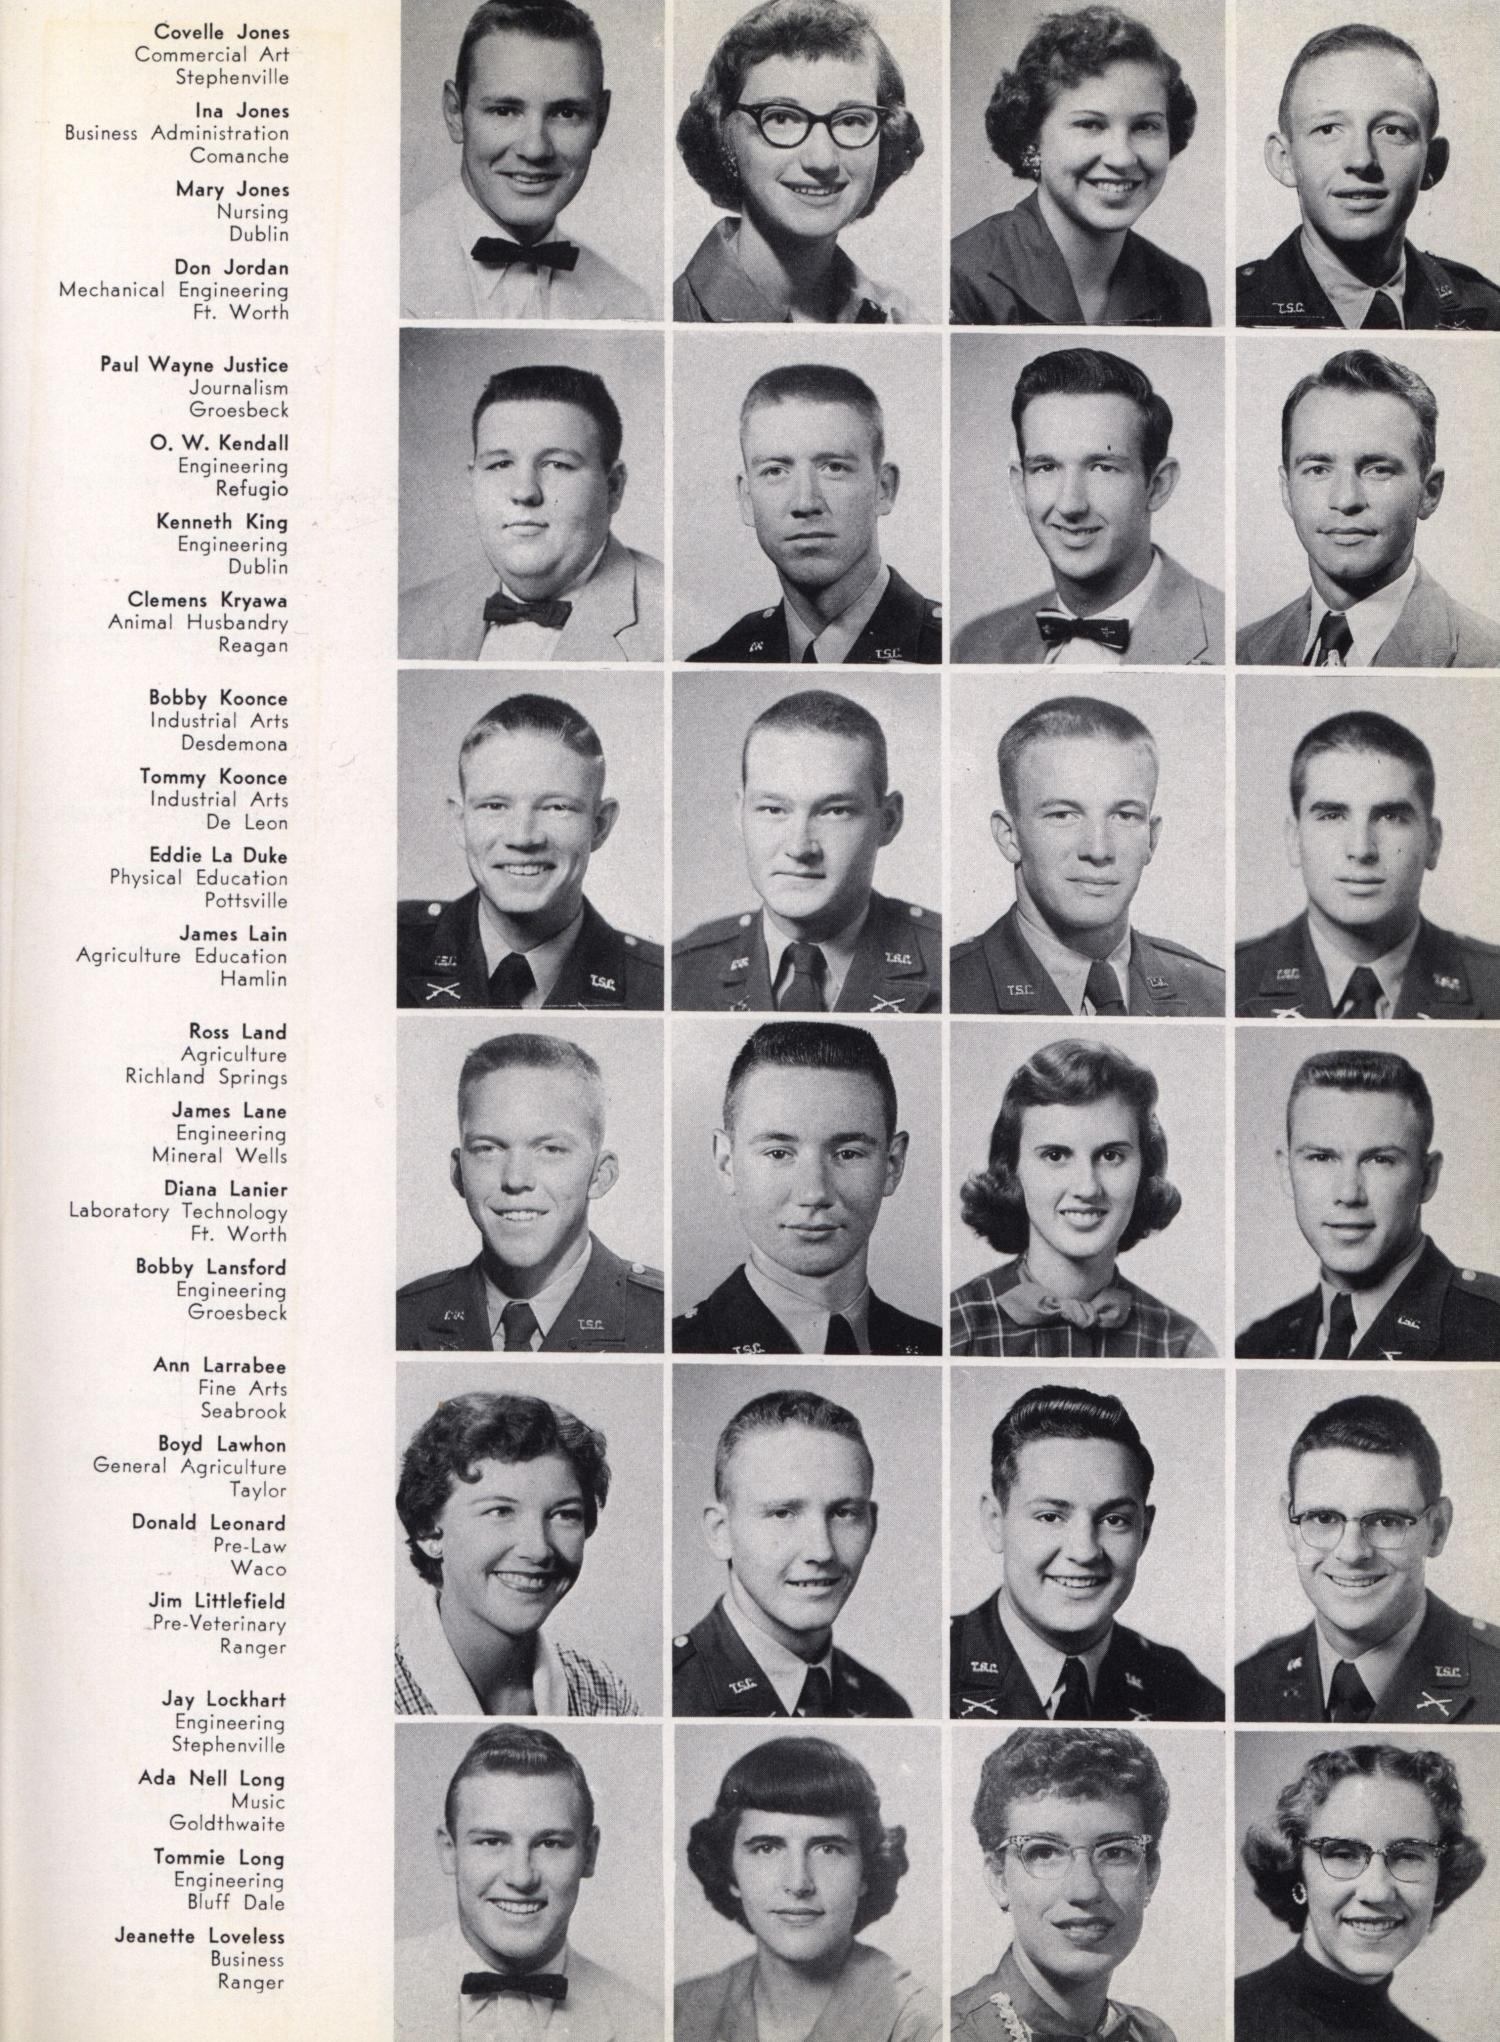 The Grassburr, Yearbook of Tarleton State College, 1956
                                                
                                                    35
                                                